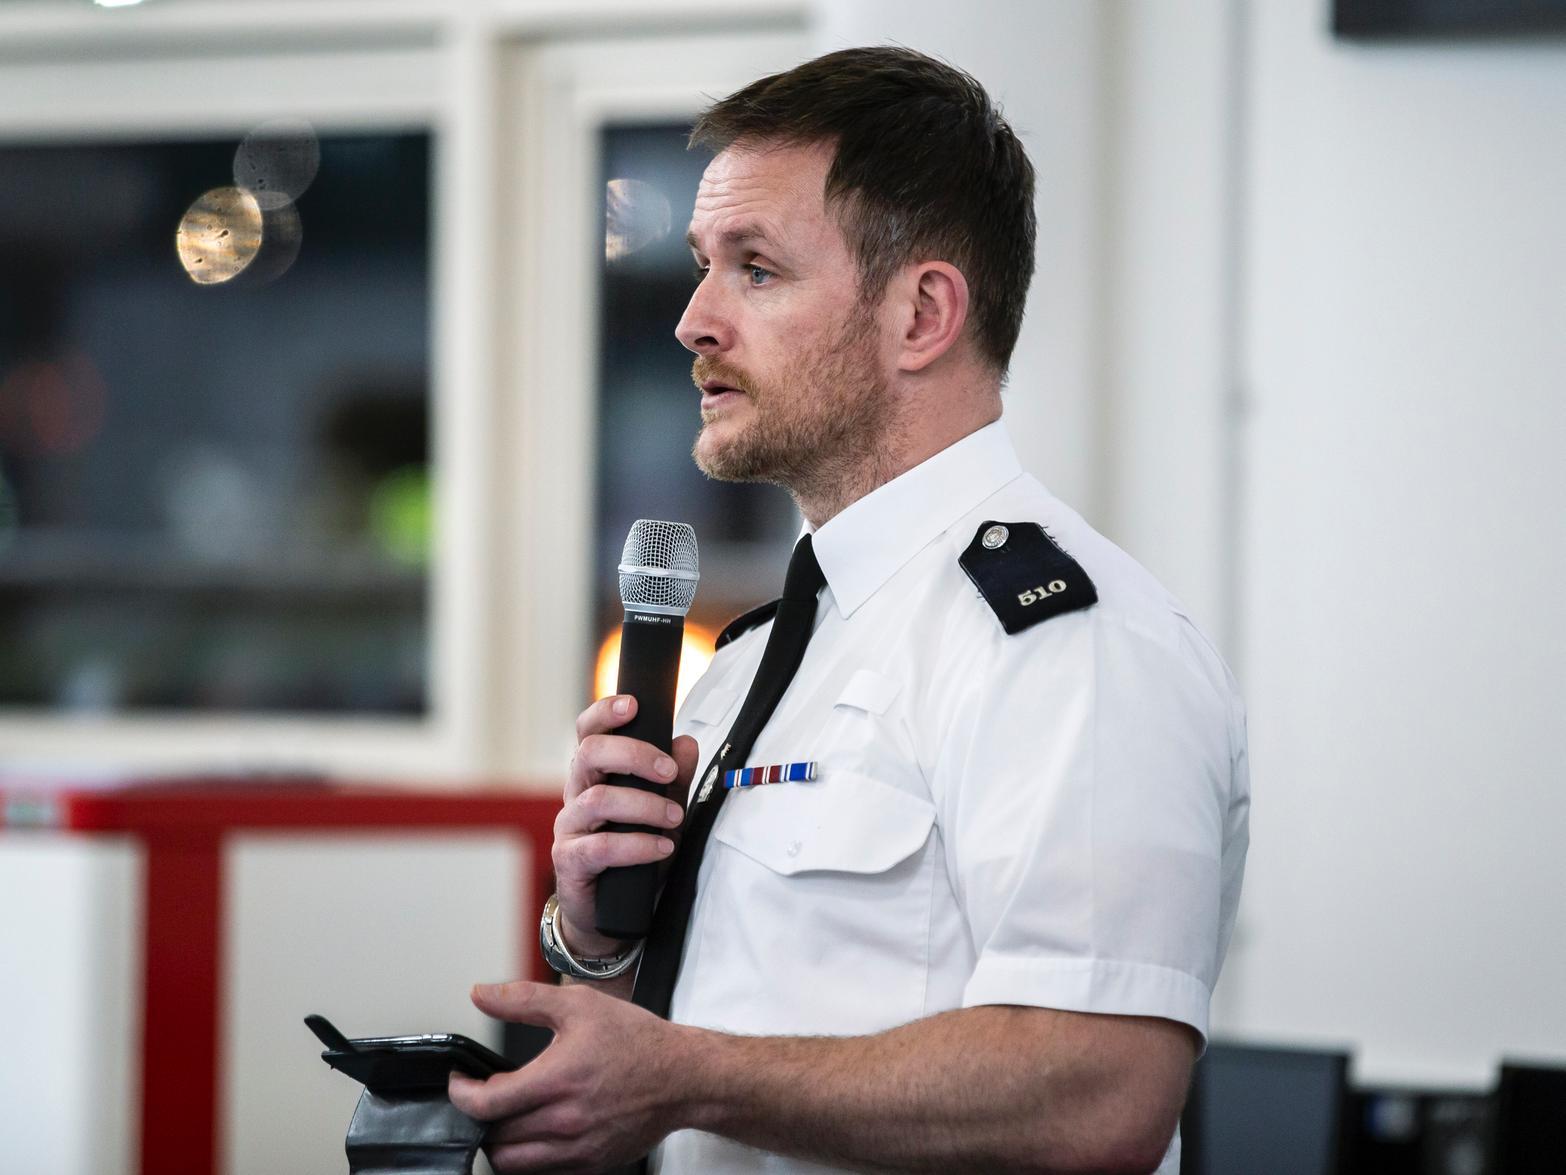 PC Stuart Roberts, one of the masterminds behind the mural, giving a speech at the unveiling. Photo: Kirsty Edmonds.